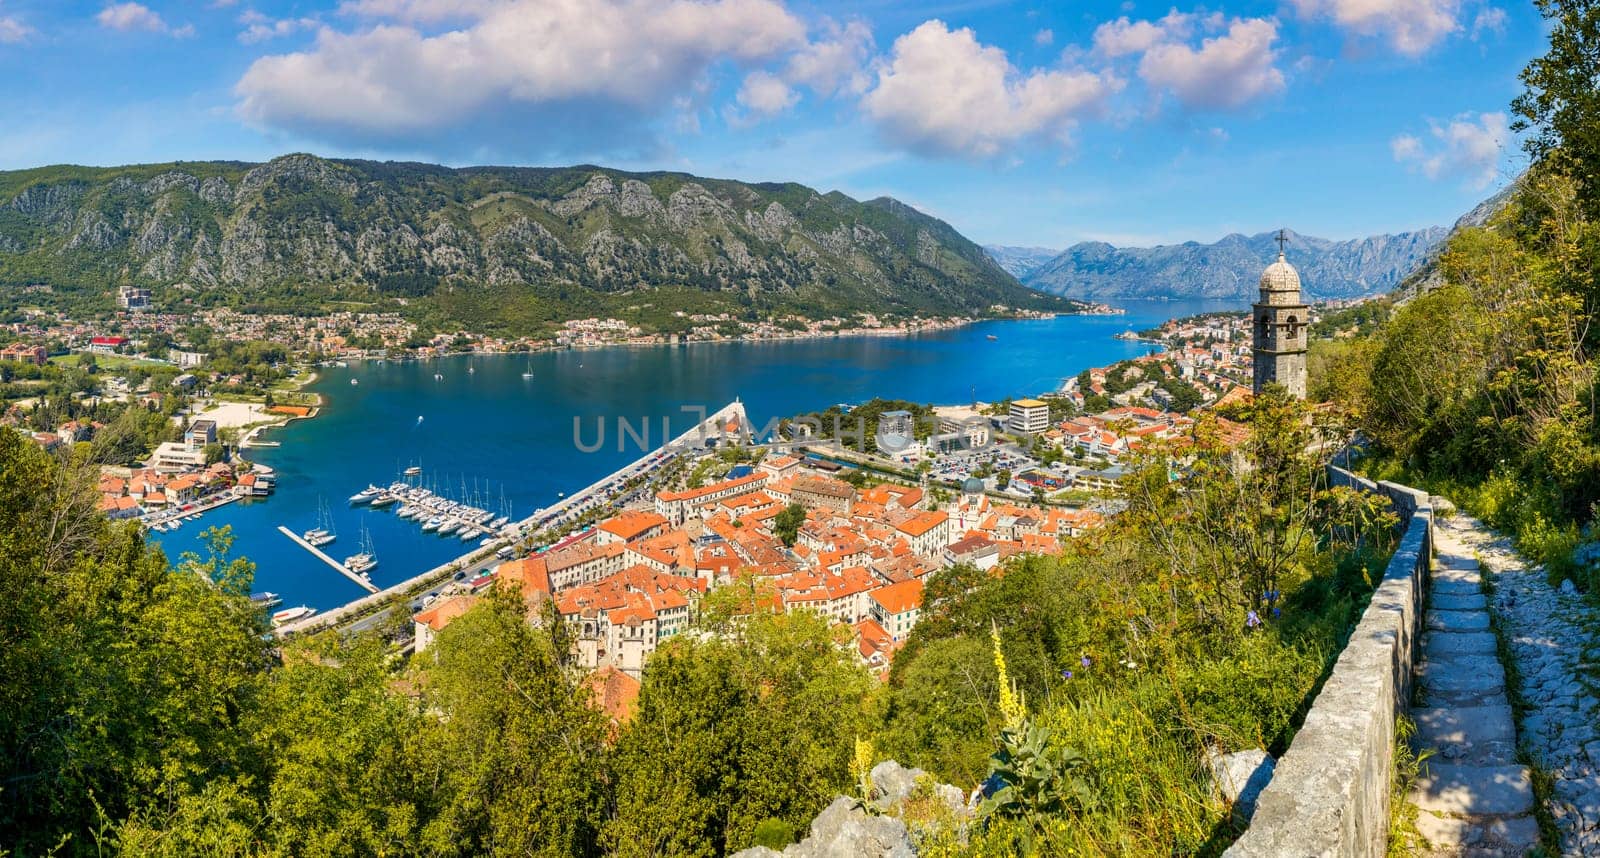 View of the old town of Kotor, Montenegro. Bay of Kotor bay is one of the most beautiful places on Adriatic Sea. Historical Kotor Old town and the Kotor bay of Adriatic sea, Montenegro.